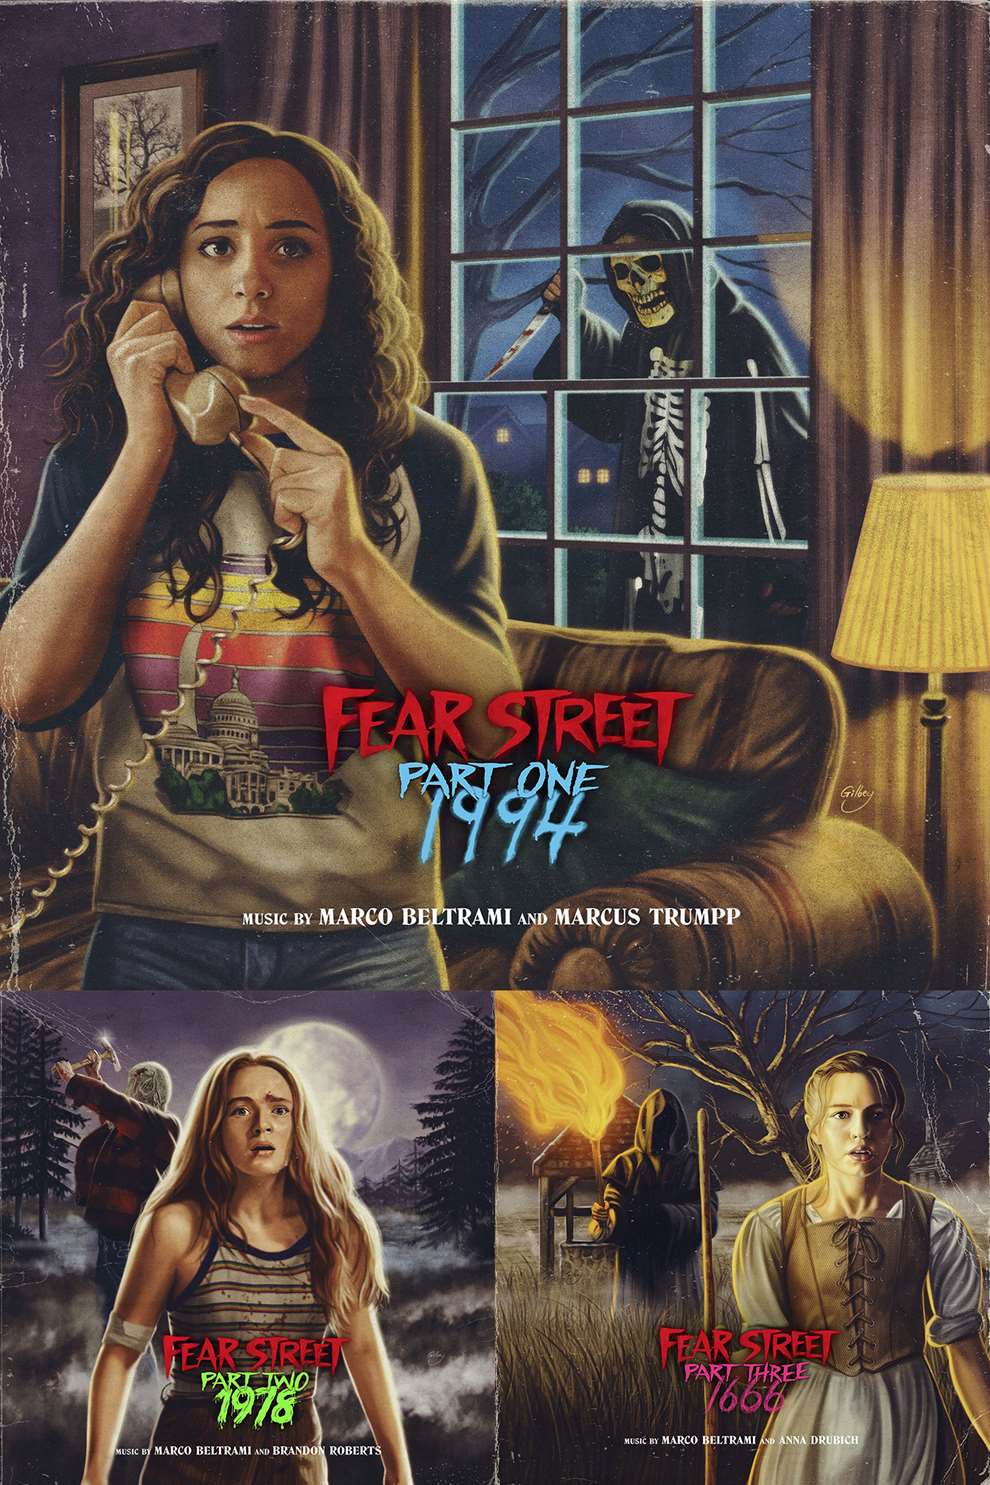 Sam  Gilbey, Old style, retro Illustrations for WaxWorks Records Deluxe 3 x LP's for Netflix's The Fear Street Films.